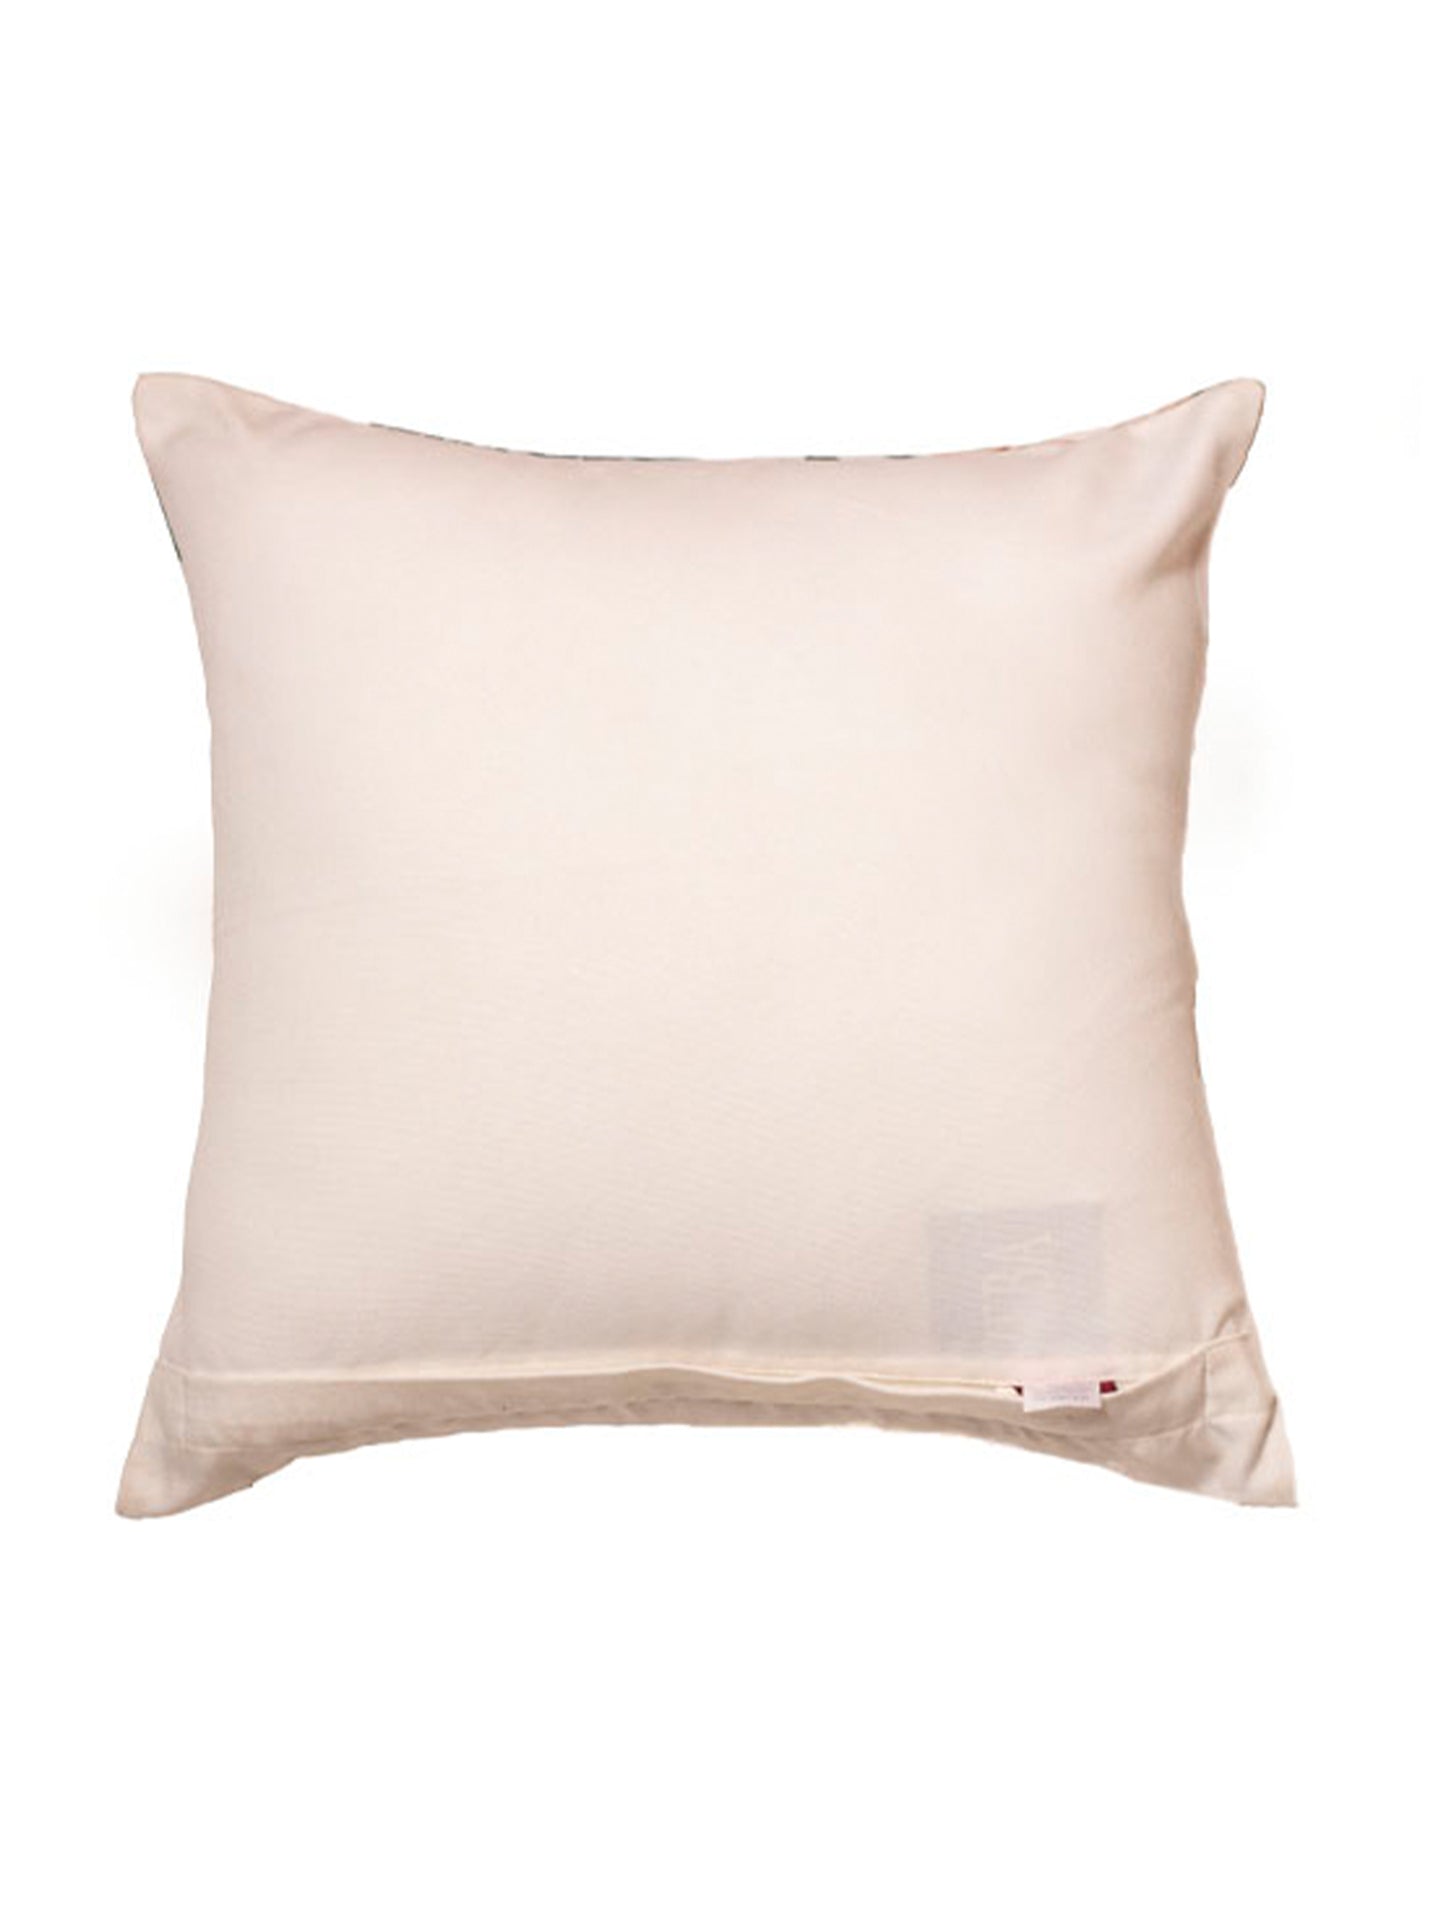 Co-ordinated Cushion Cover Set Of 5 Cotton Blend, Polycanvas, Polyester Multi - 20" X 20", 16" X 16", 12" X 22"